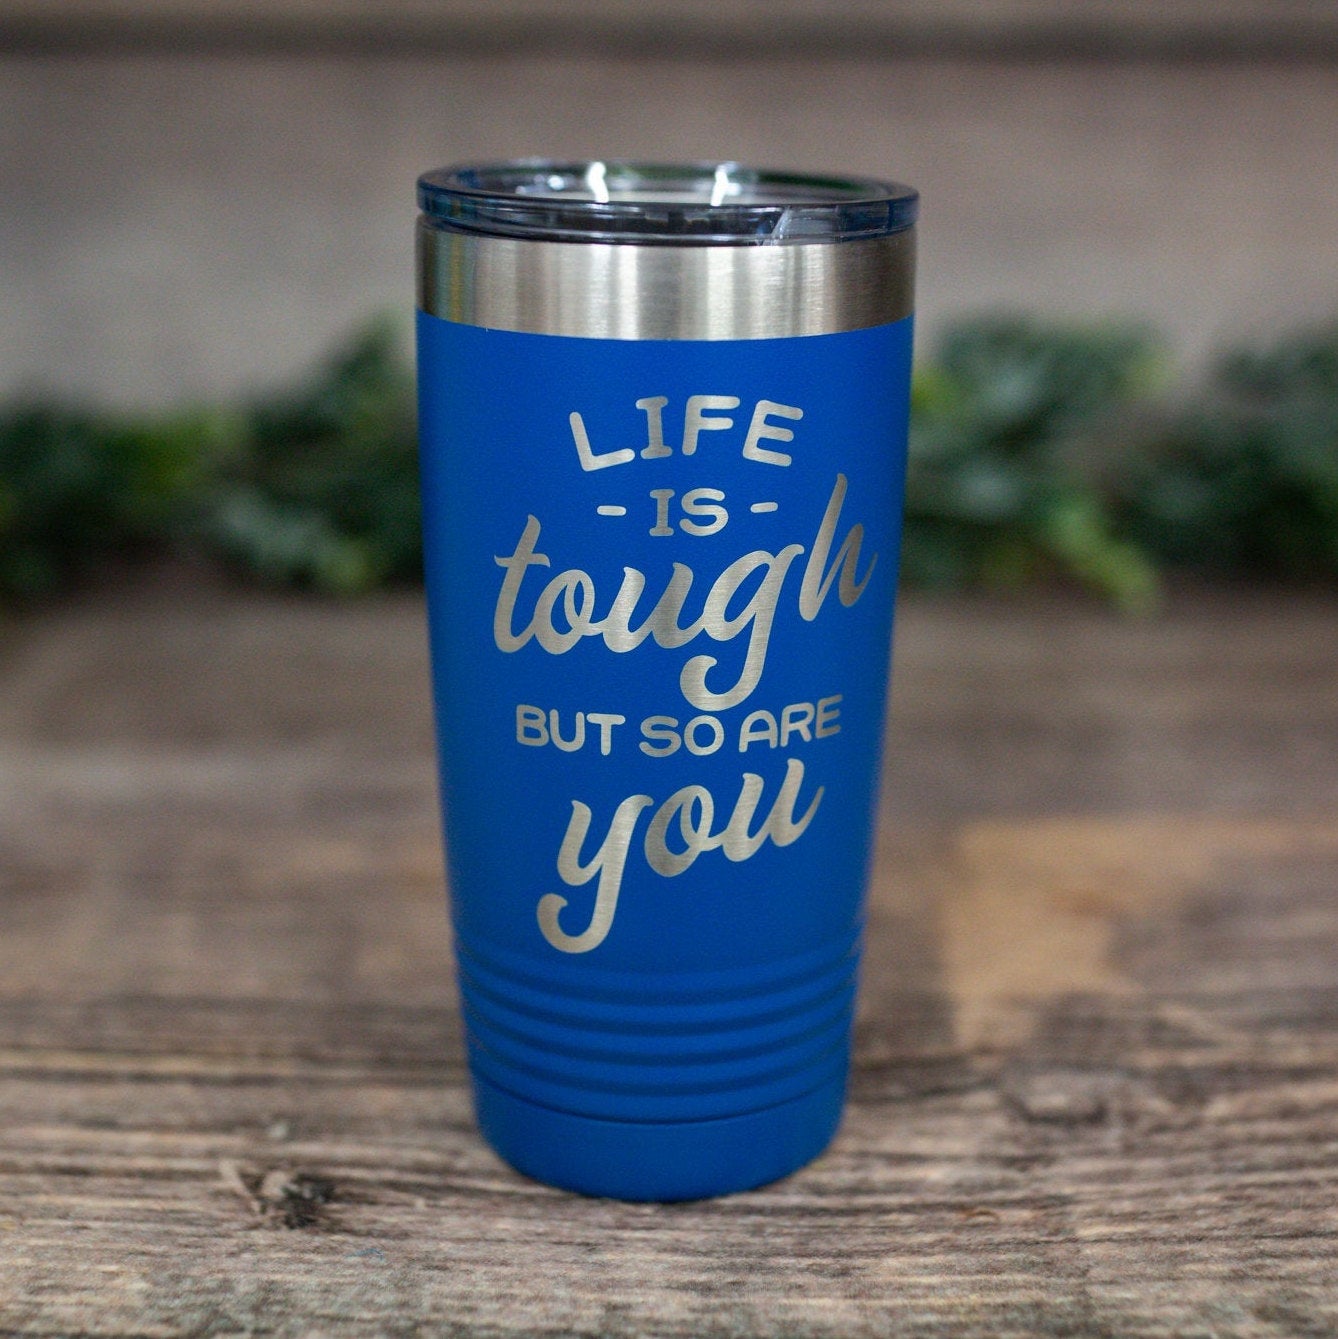 https://3cetching.com/wp-content/uploads/2021/07/life-is-tough-but-so-are-you-engraved-tumbler-personalized-travel-mug-motivational-gift-mug-for-her-60f72ec6.jpg